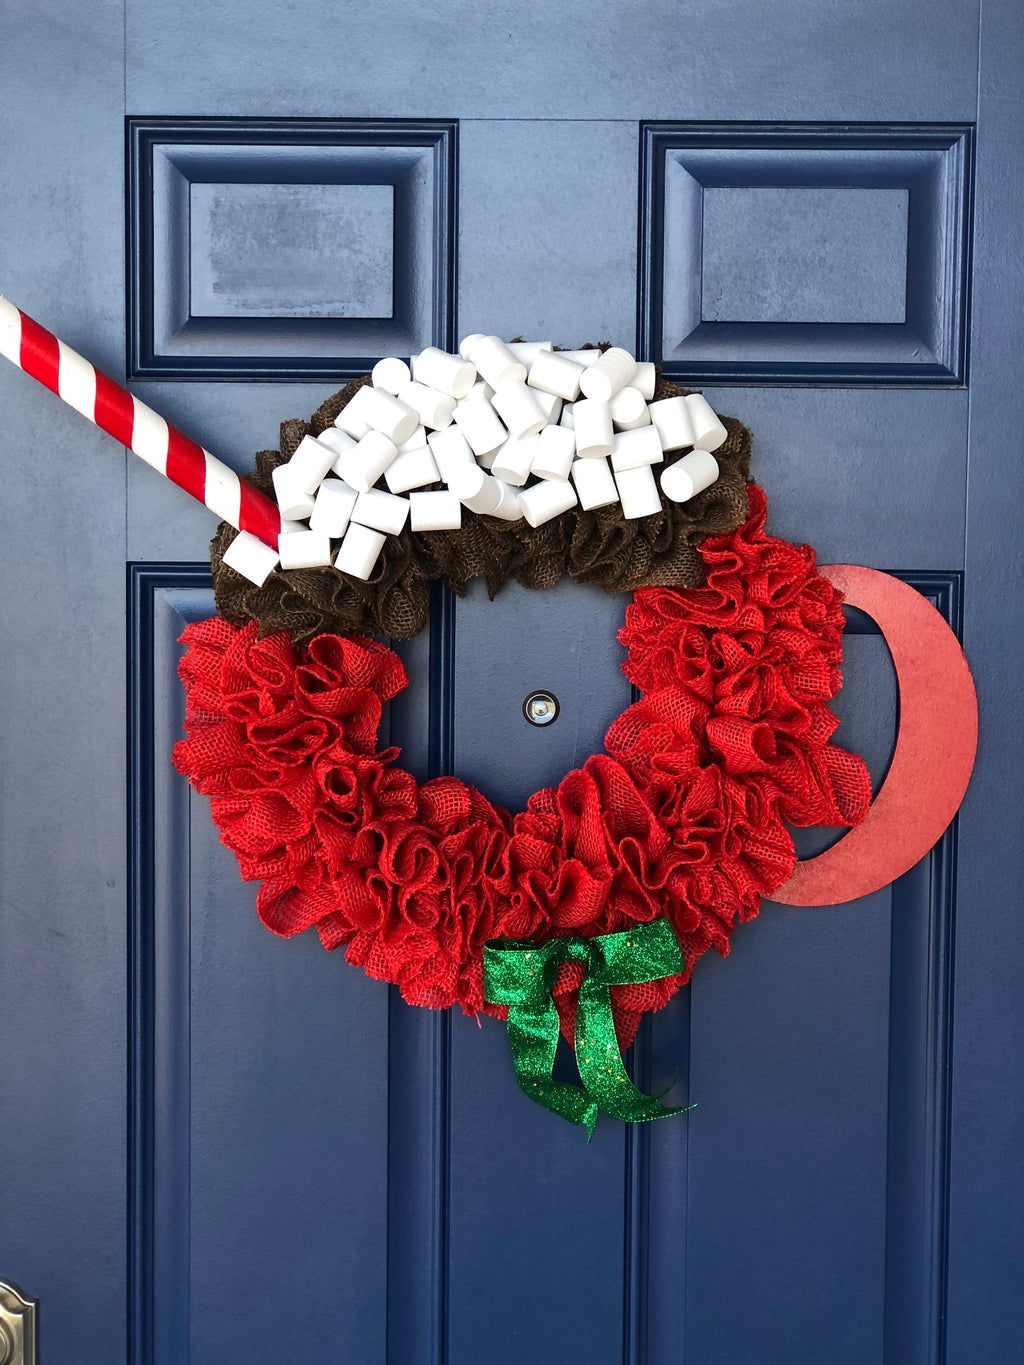 Red Burlap Wreath in the Shape of a Cup of Hot Cocoa with White Foam Marshmallows, a peppermint stick straw and a red wood handle on the cup with a green bow on a blue door. 